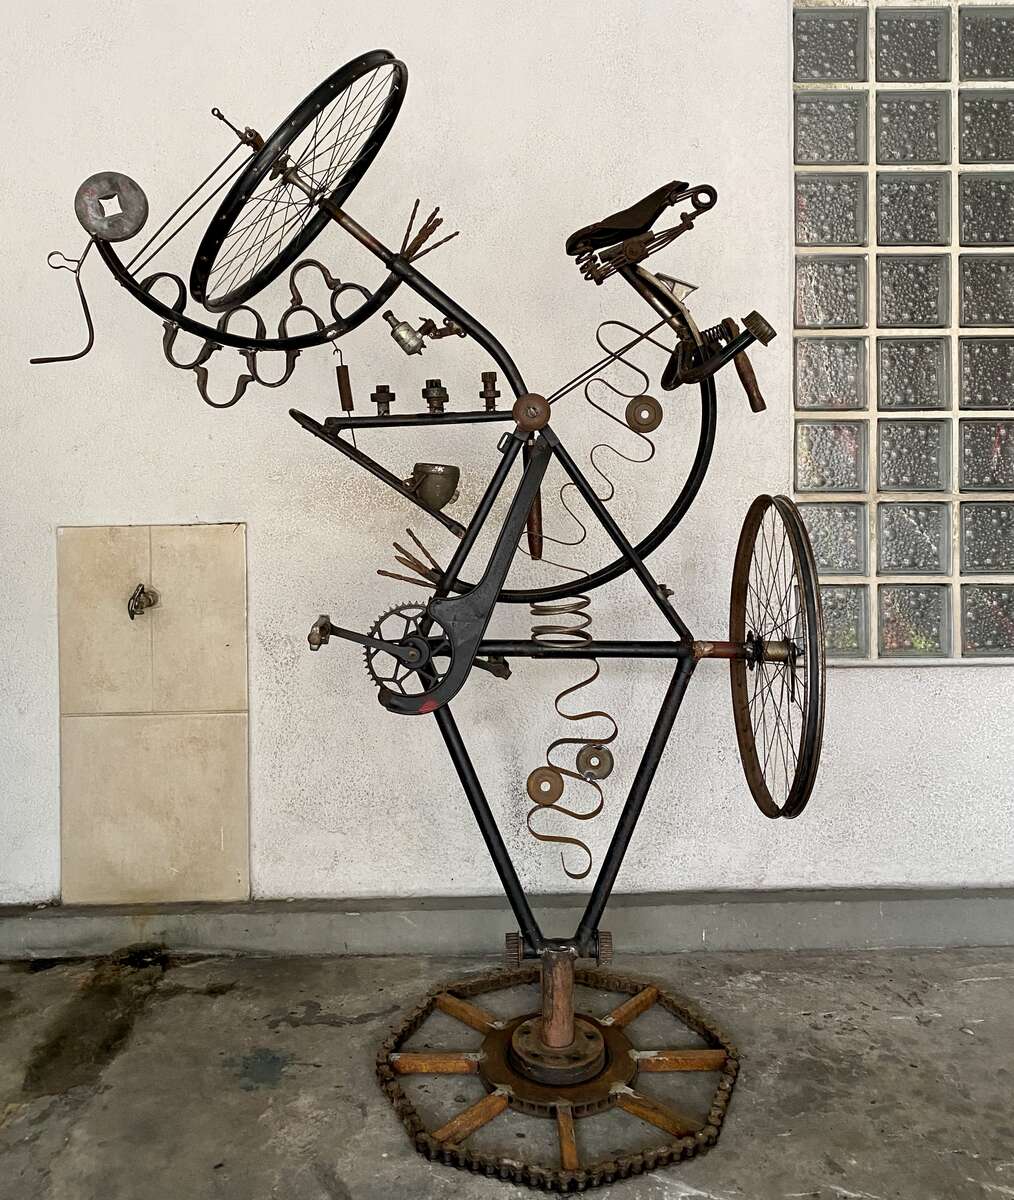 Classic 1905 Swiss Army mountain bike transformed with a mix of found industrial pieces limited edition 1/1$8000 USD